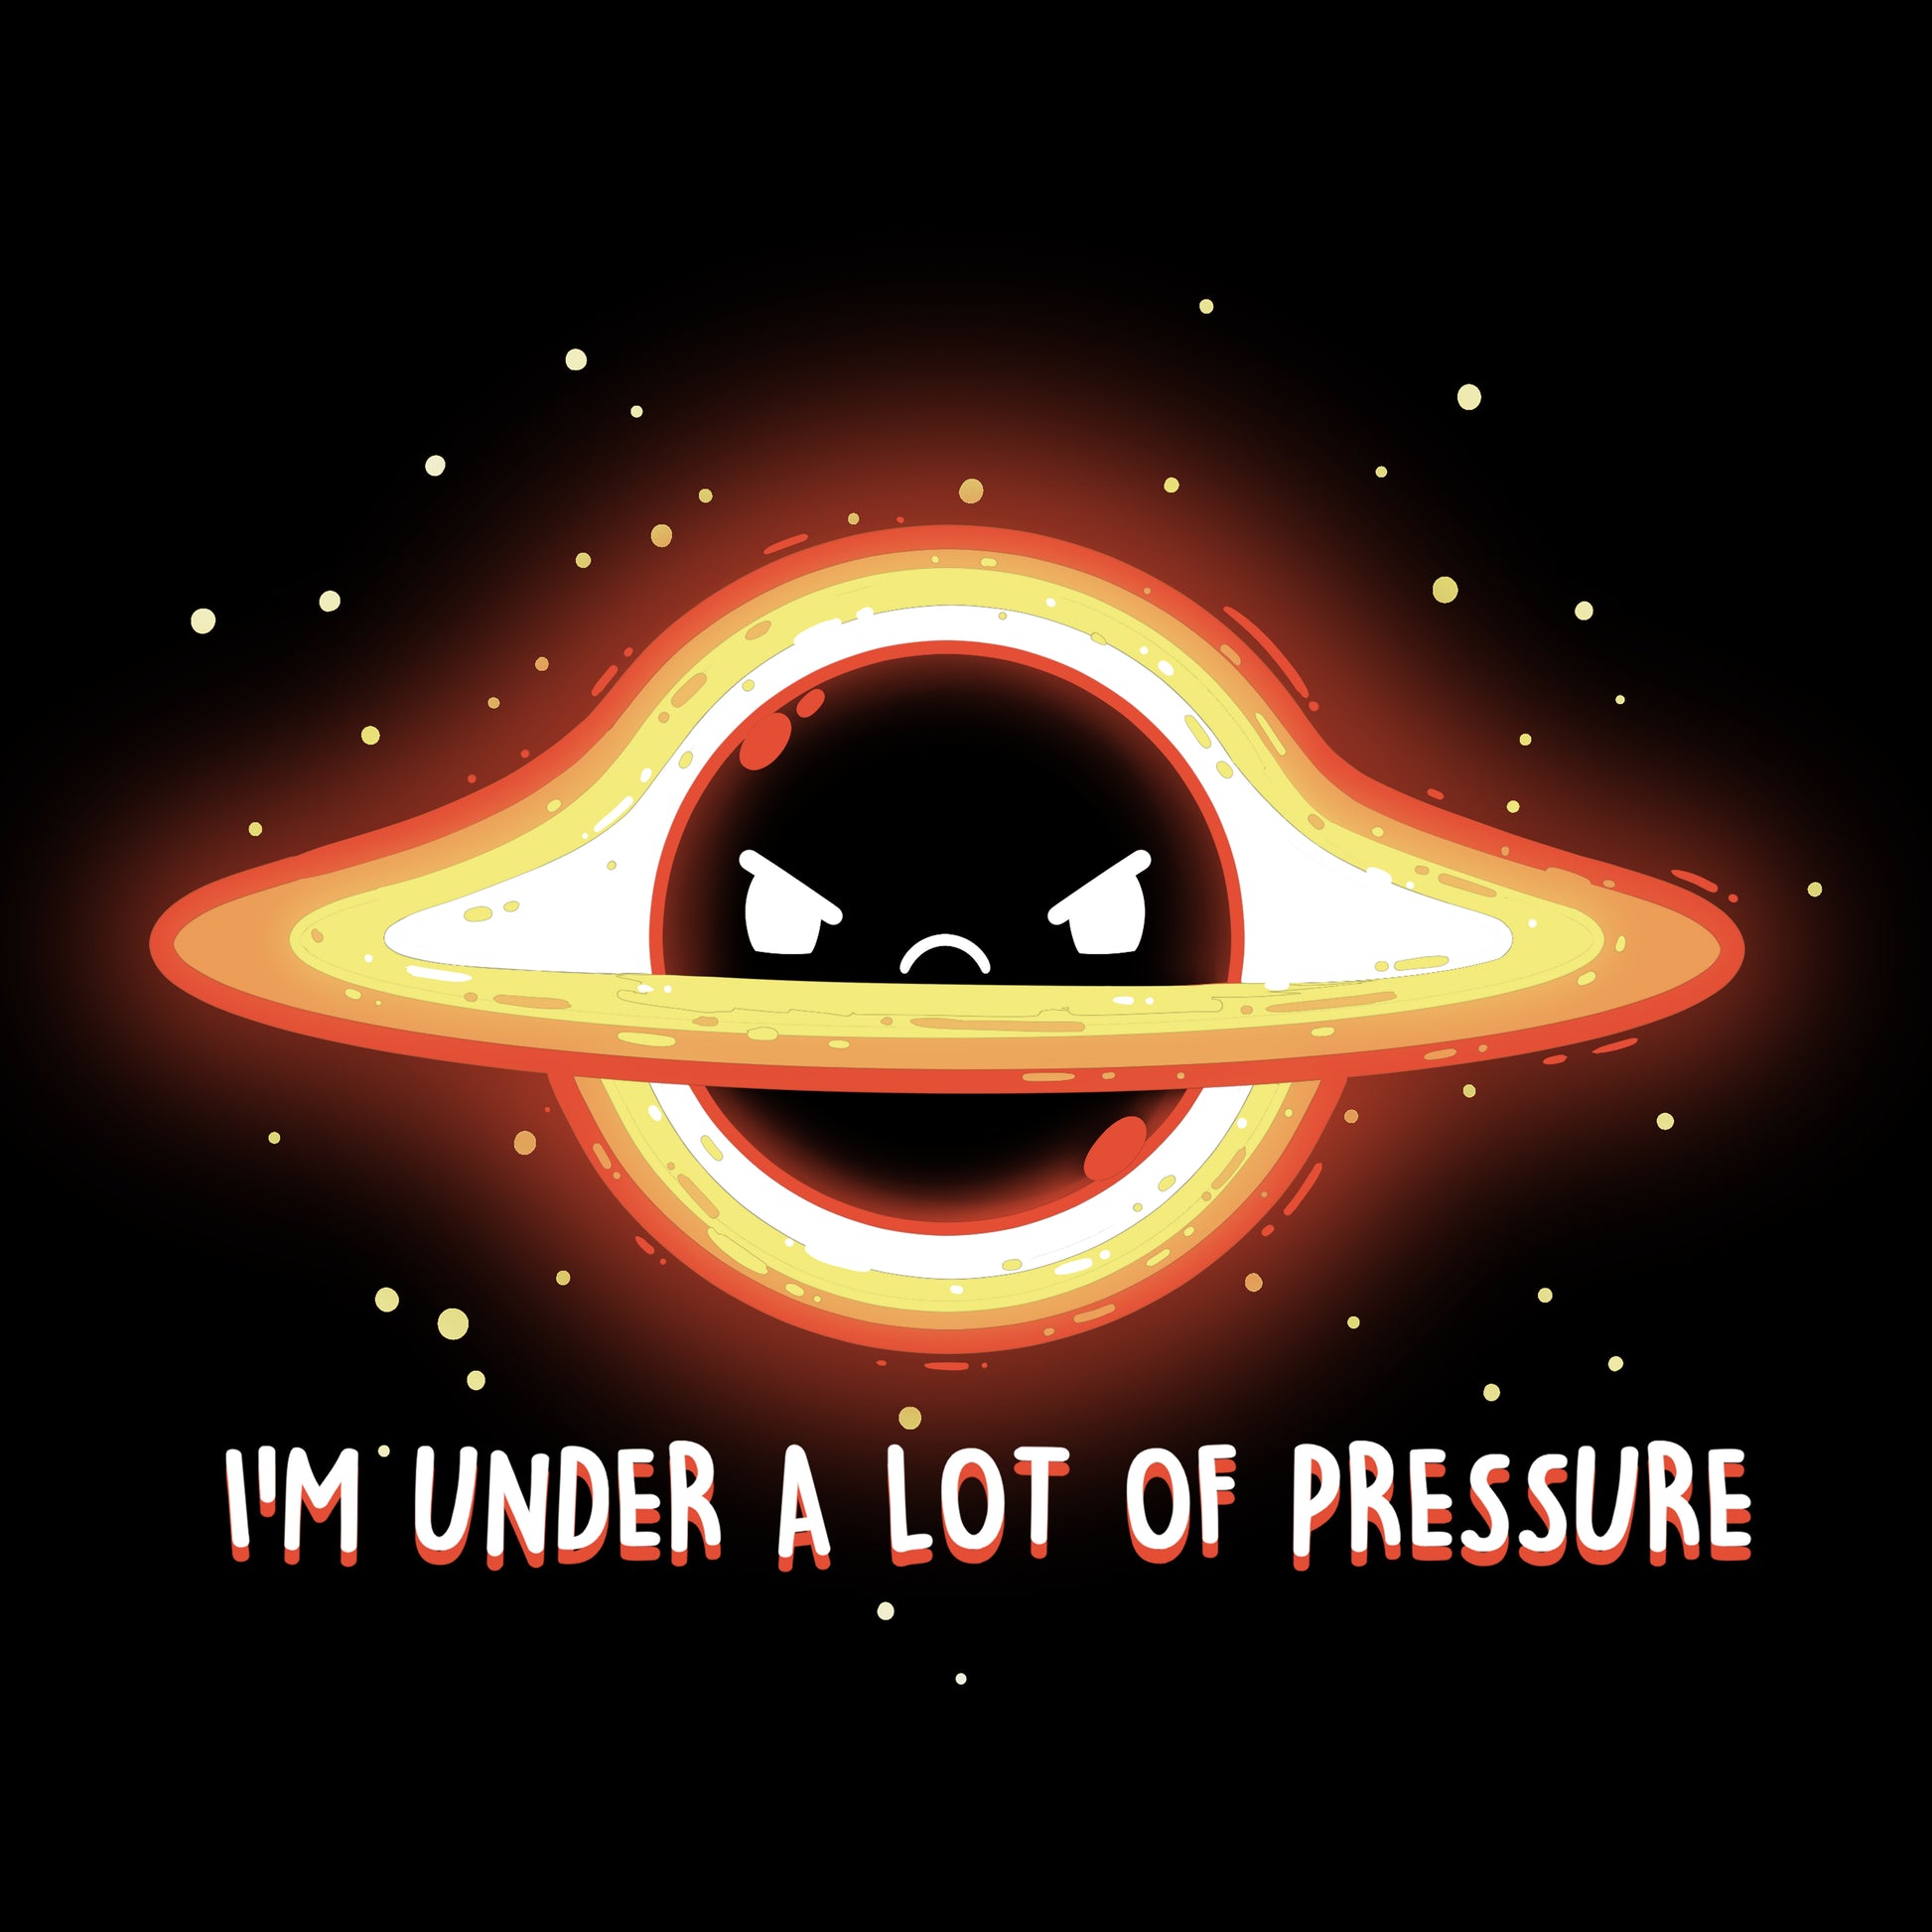 I'm under a lot of pressure wearing my TeeTurtle black t-shirt in the "I'm Under a Lot of Pressure" design.